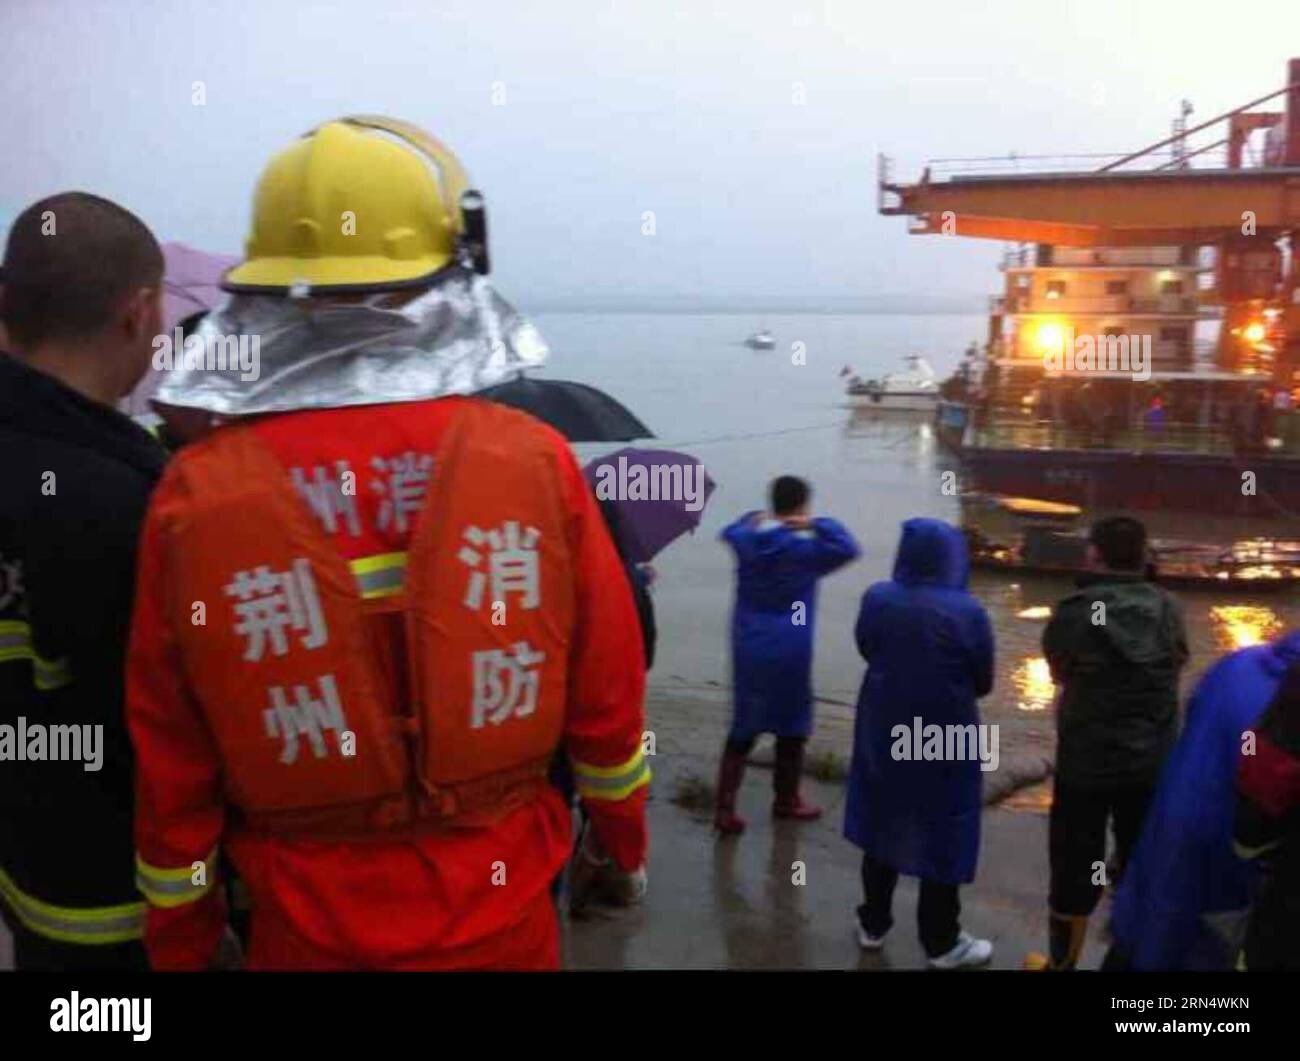 Rescuers work at the ship sinking site in the Jianli section of the Yangtze River in central China s Hubei Province June 2, 2015. A passenger ship carrying 458 people sunk Monday night in the Yangtze River, China s longest. More than 20 people have been rescued. () (mcg) CHINA-HUBEI-JIANLI-SINKING SHIP (CN) Xinhua PUBLICATIONxNOTxINxCHN   Rescue Work AT The Ship sinking Site in The Jianli Section of The Yangtze River in Central China S Hubei Province June 2 2015 a Passenger Ship carrying 458 Celebrities sunk Monday Night in The Yangtze River China S LONGEST More than 20 Celebrities have been R Stock Photo